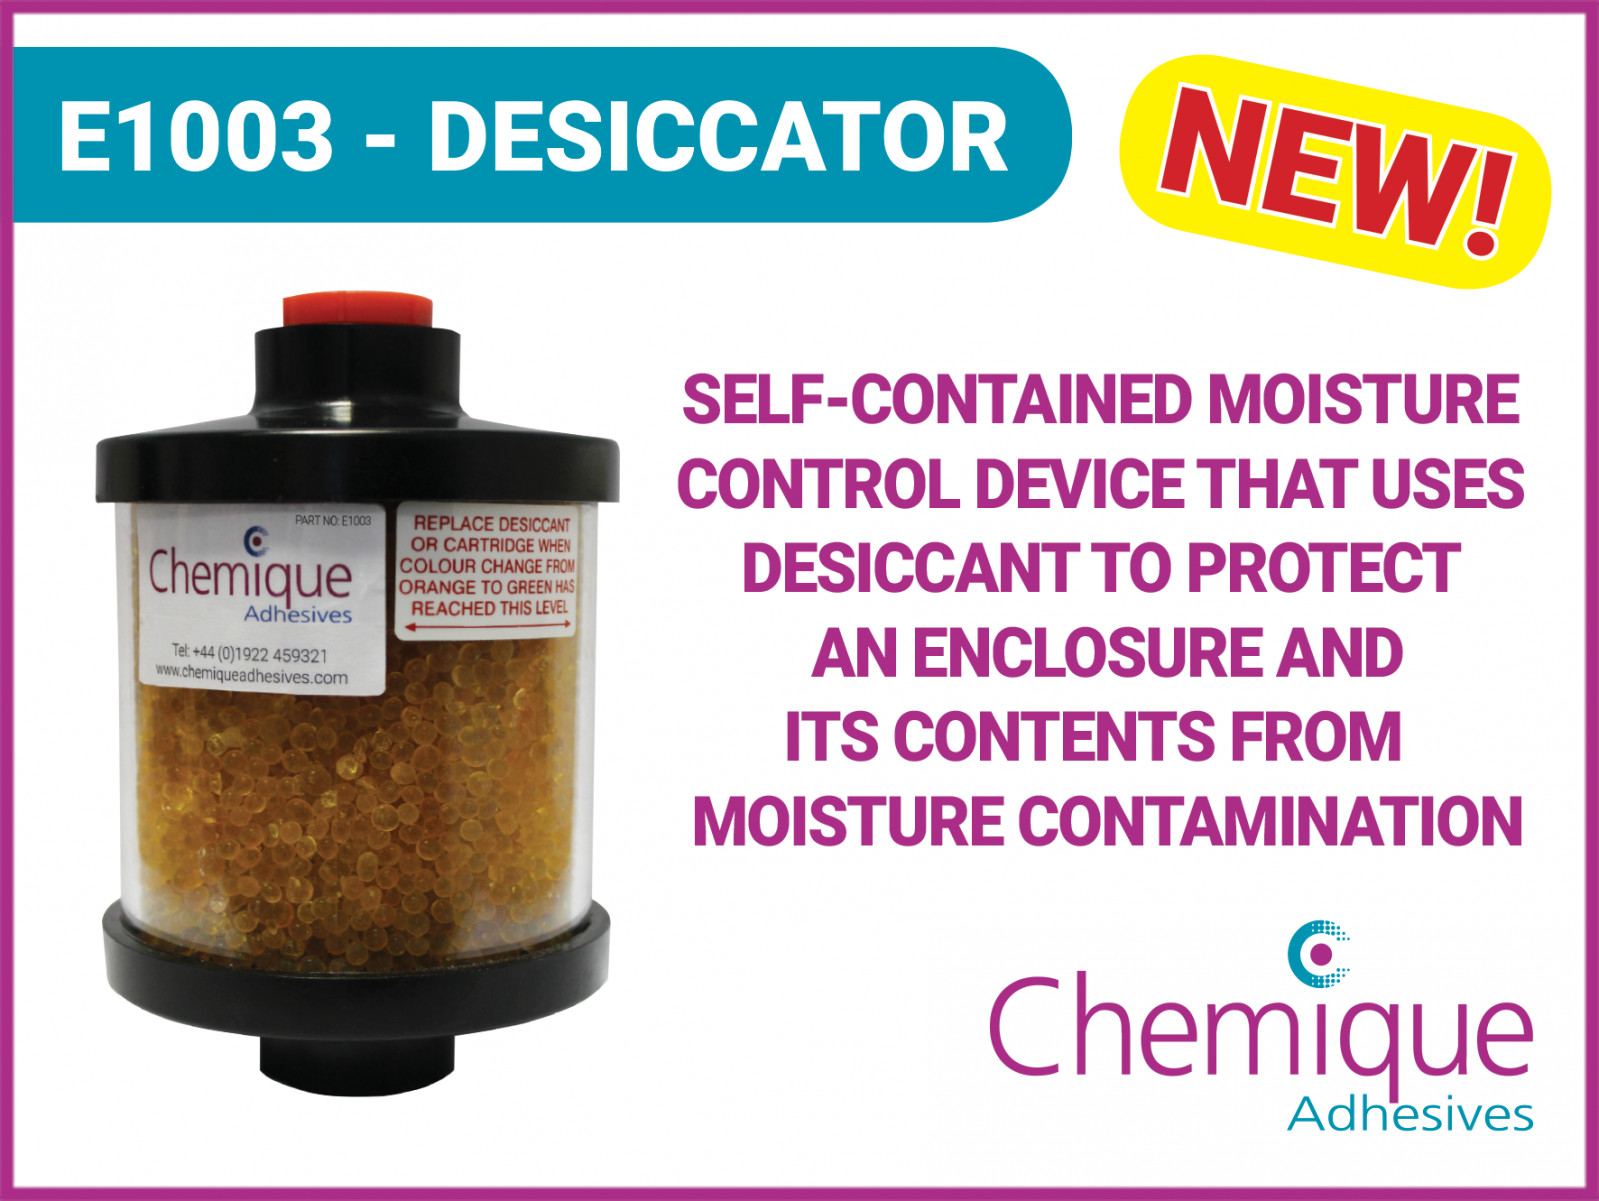 Chemique Adhesives launches new desiccator